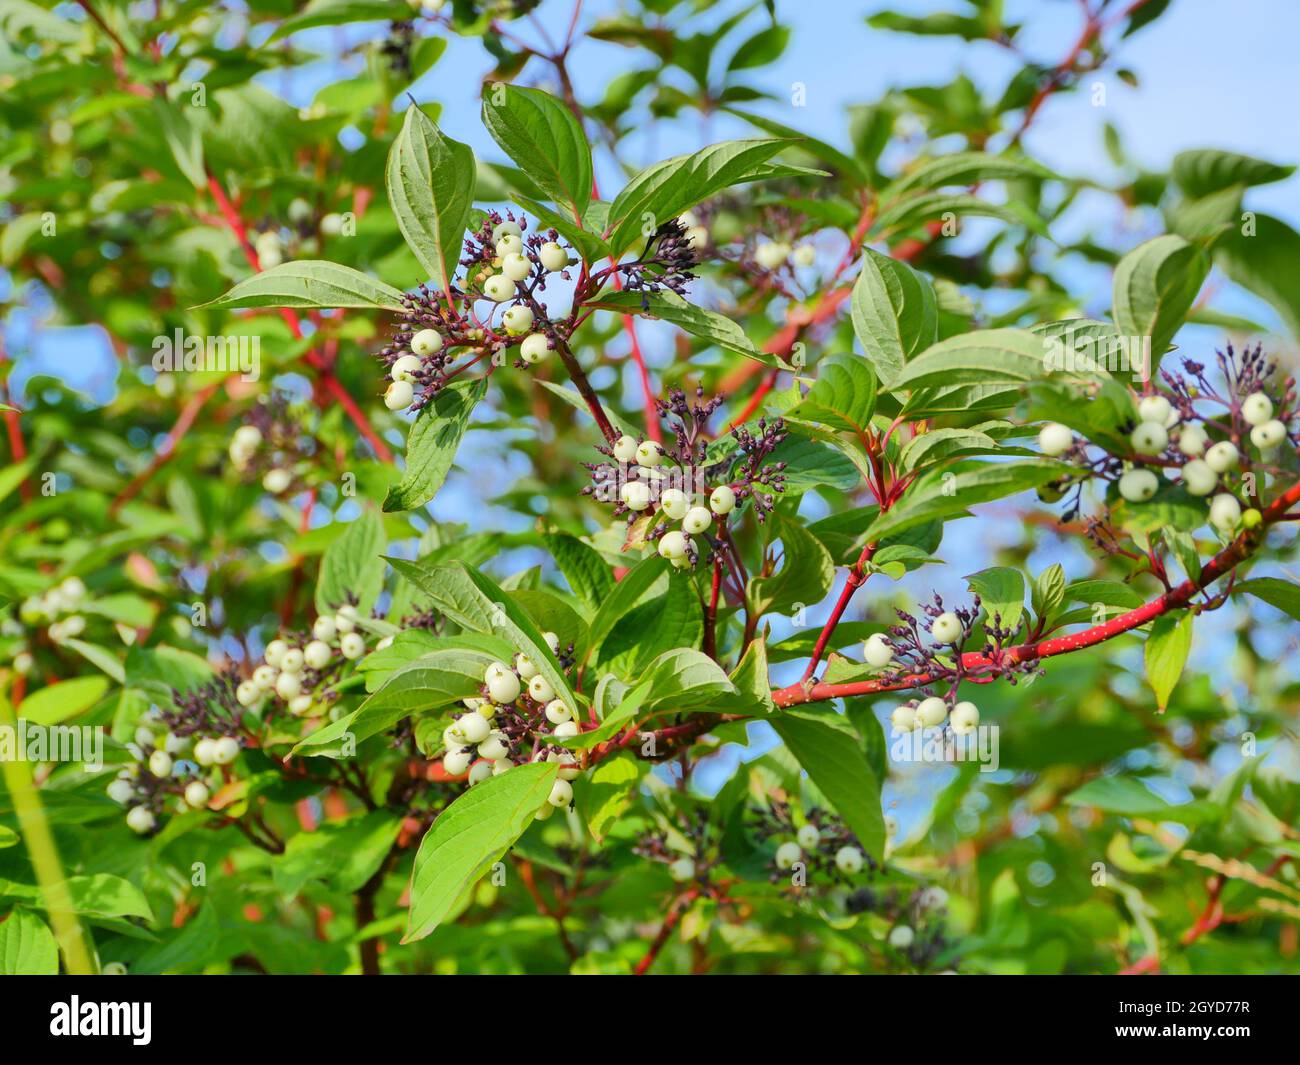 Sorbus cashmiriana or Kashmir mountain ash with white fruits on red branches close-up Stock Photo